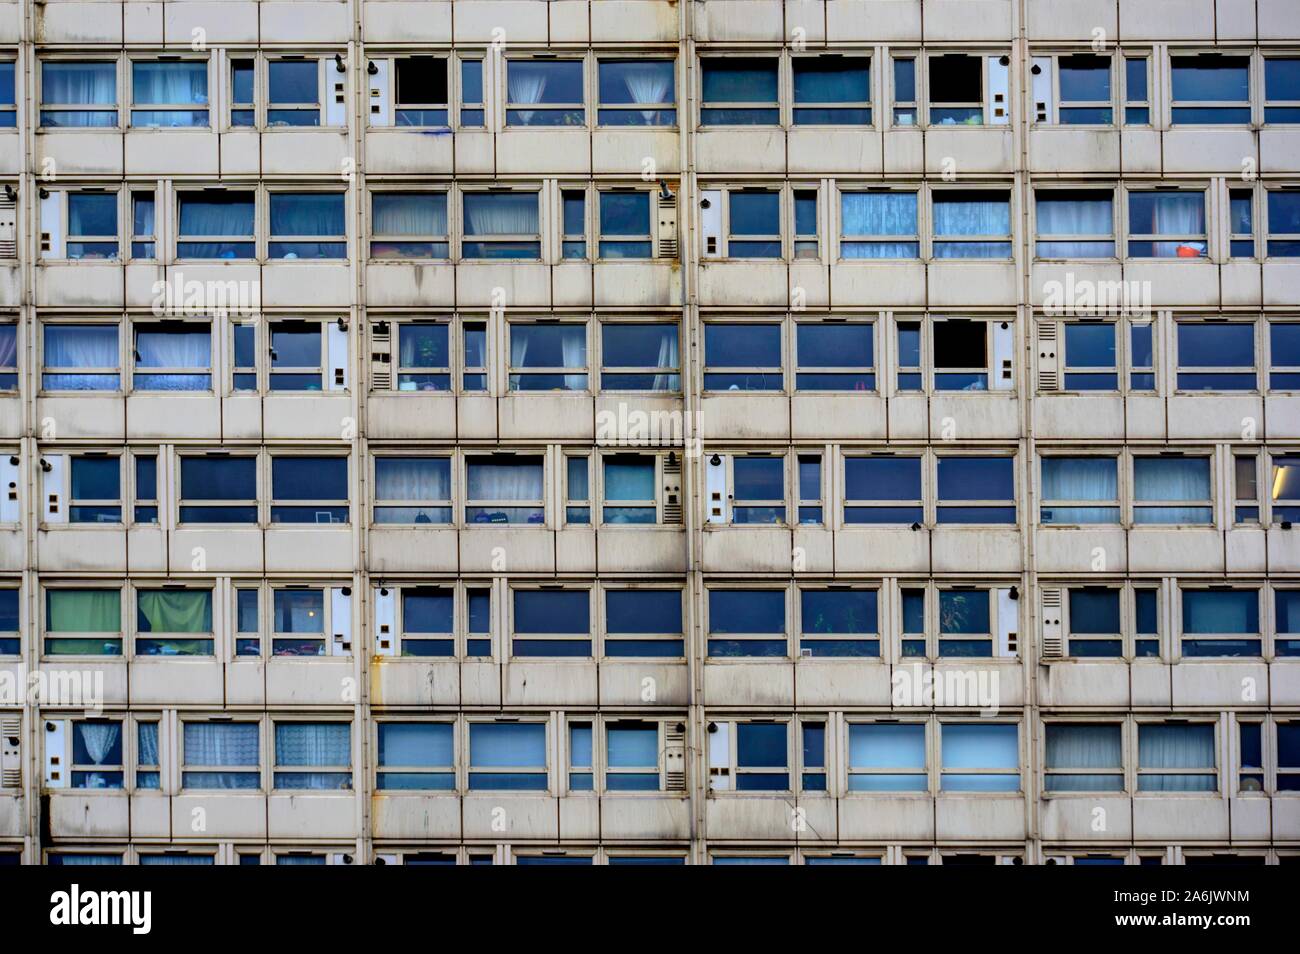 Deptford, London, United Kingdom - October 12, 2019: White facade of poor quality social housing apartment block Stock Photo